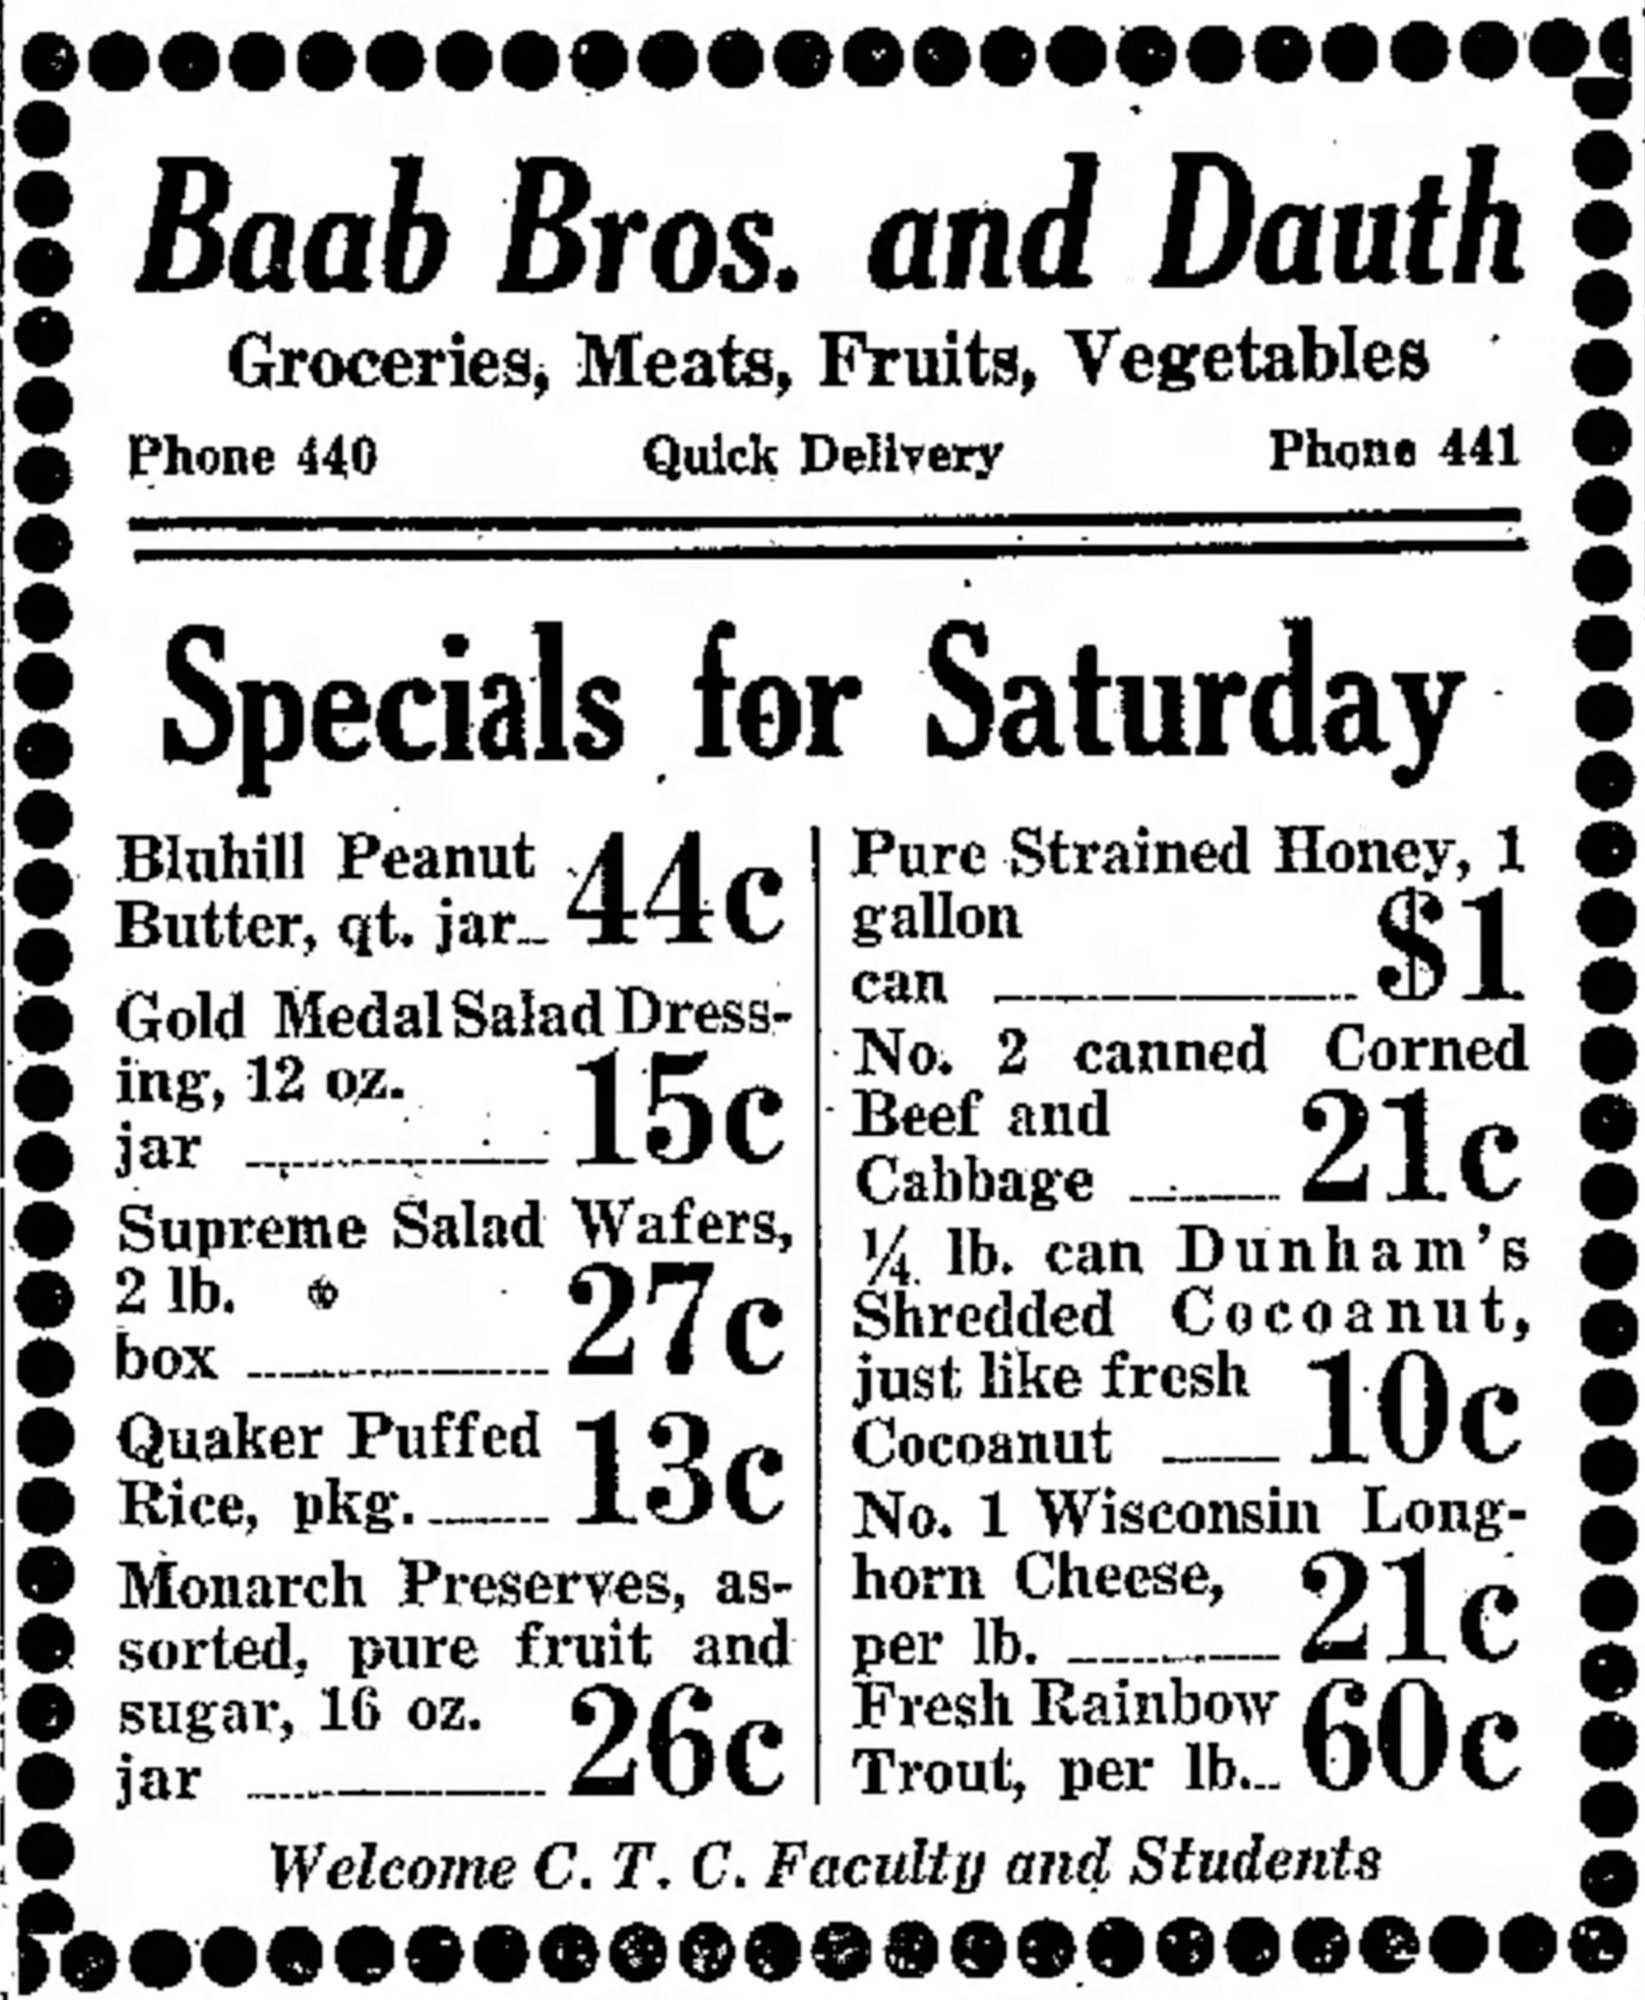 Dauth Family Archive - 1931-09-25 - Greeley Daily Tribune - Baab Bros and Dauth Advertisement